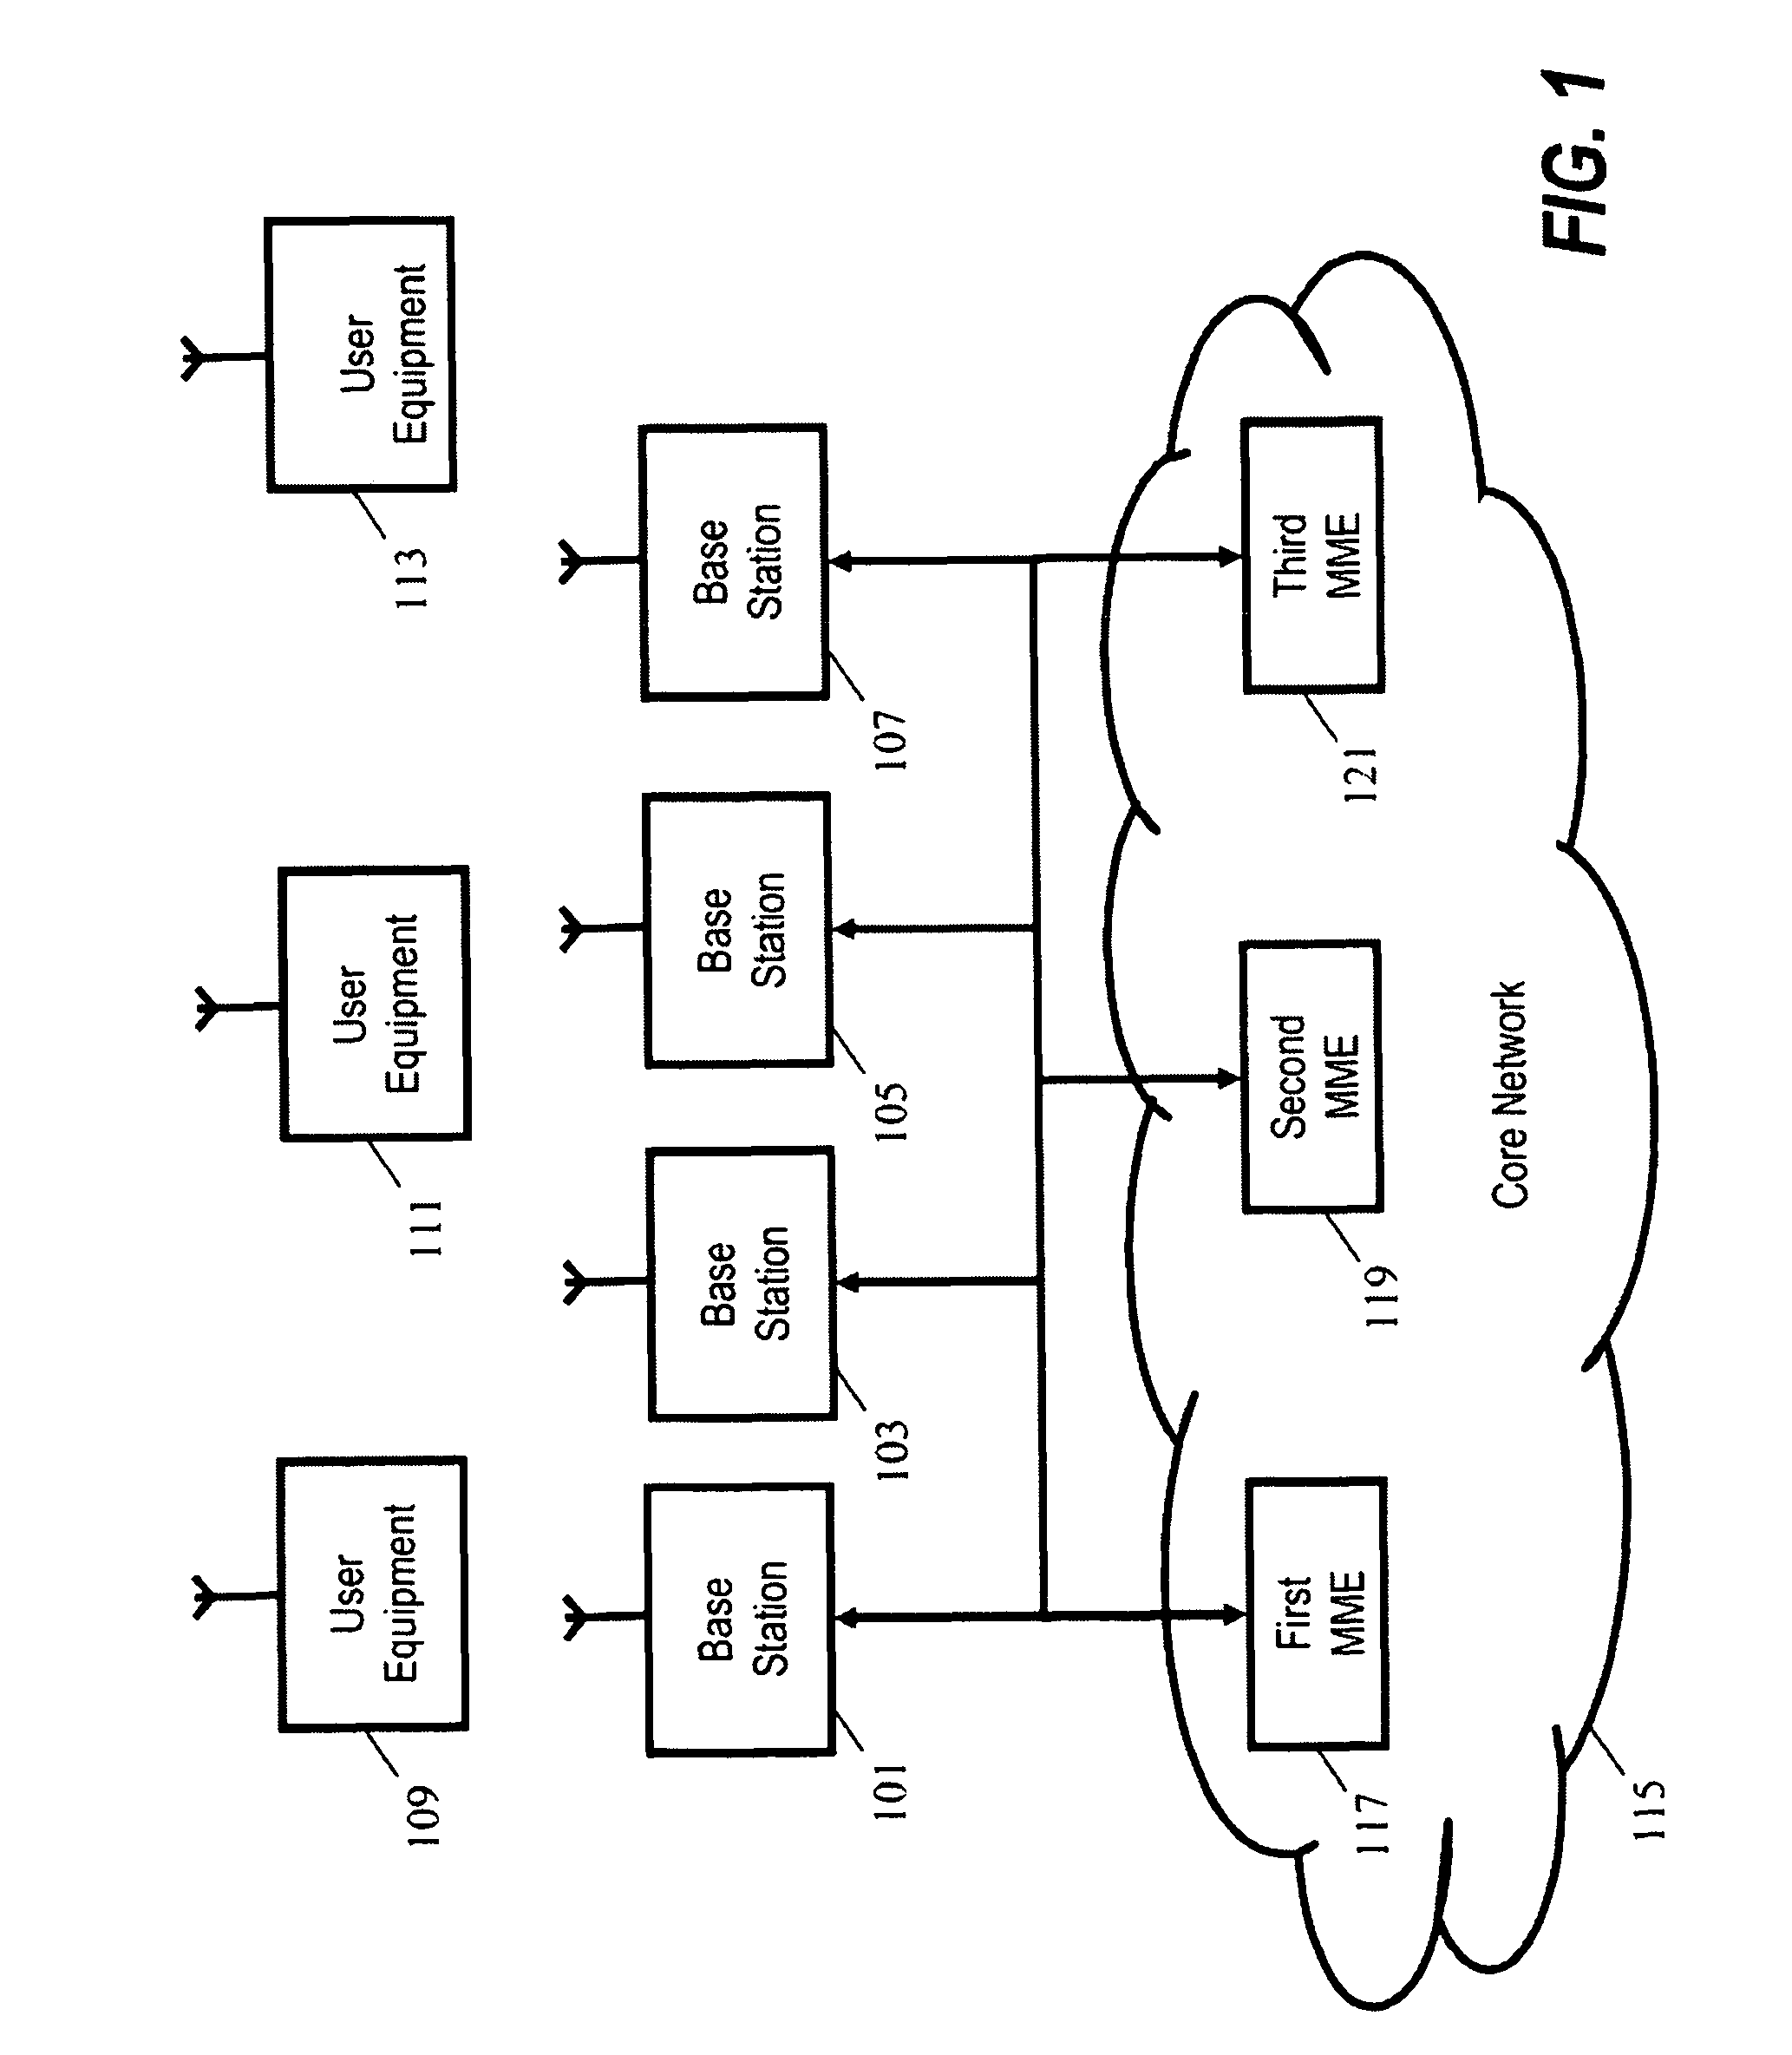 Load management for a mobility management entity of a cellular communication system